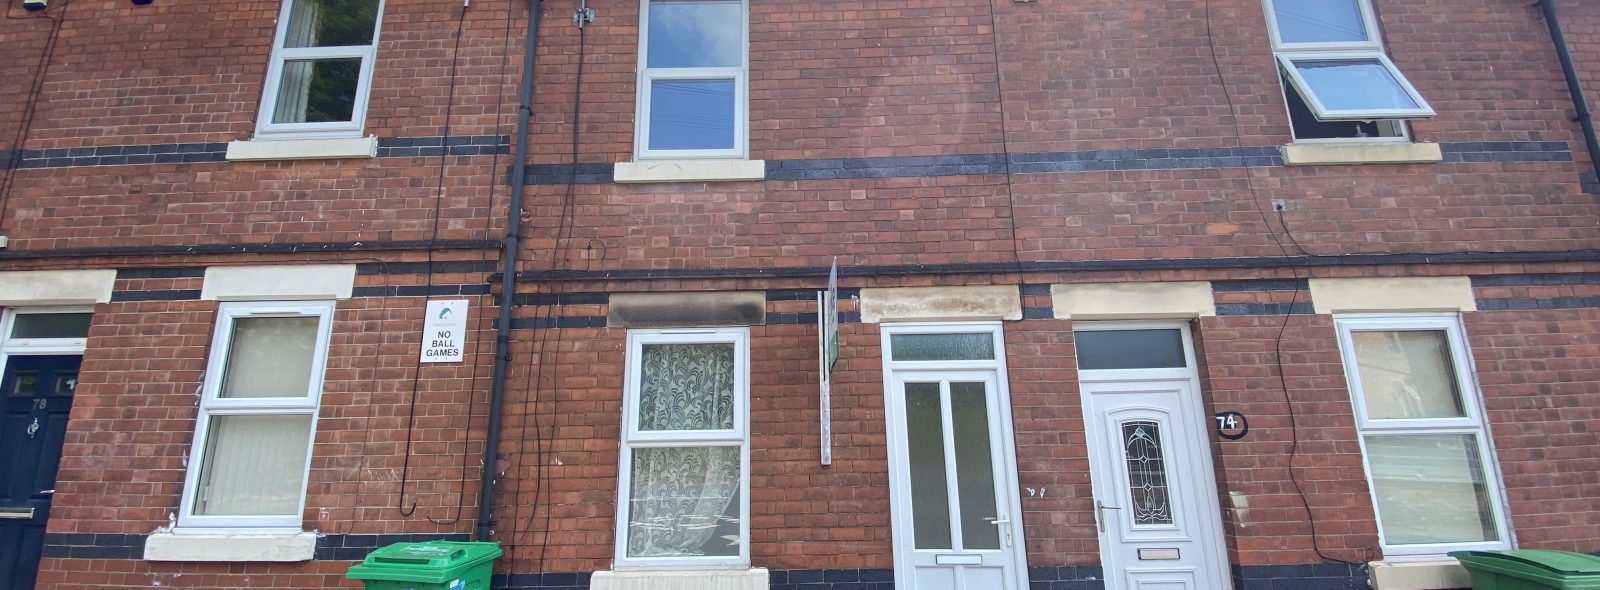 2 Bed House Chandos Street St Anns Nottingham Letting Agents